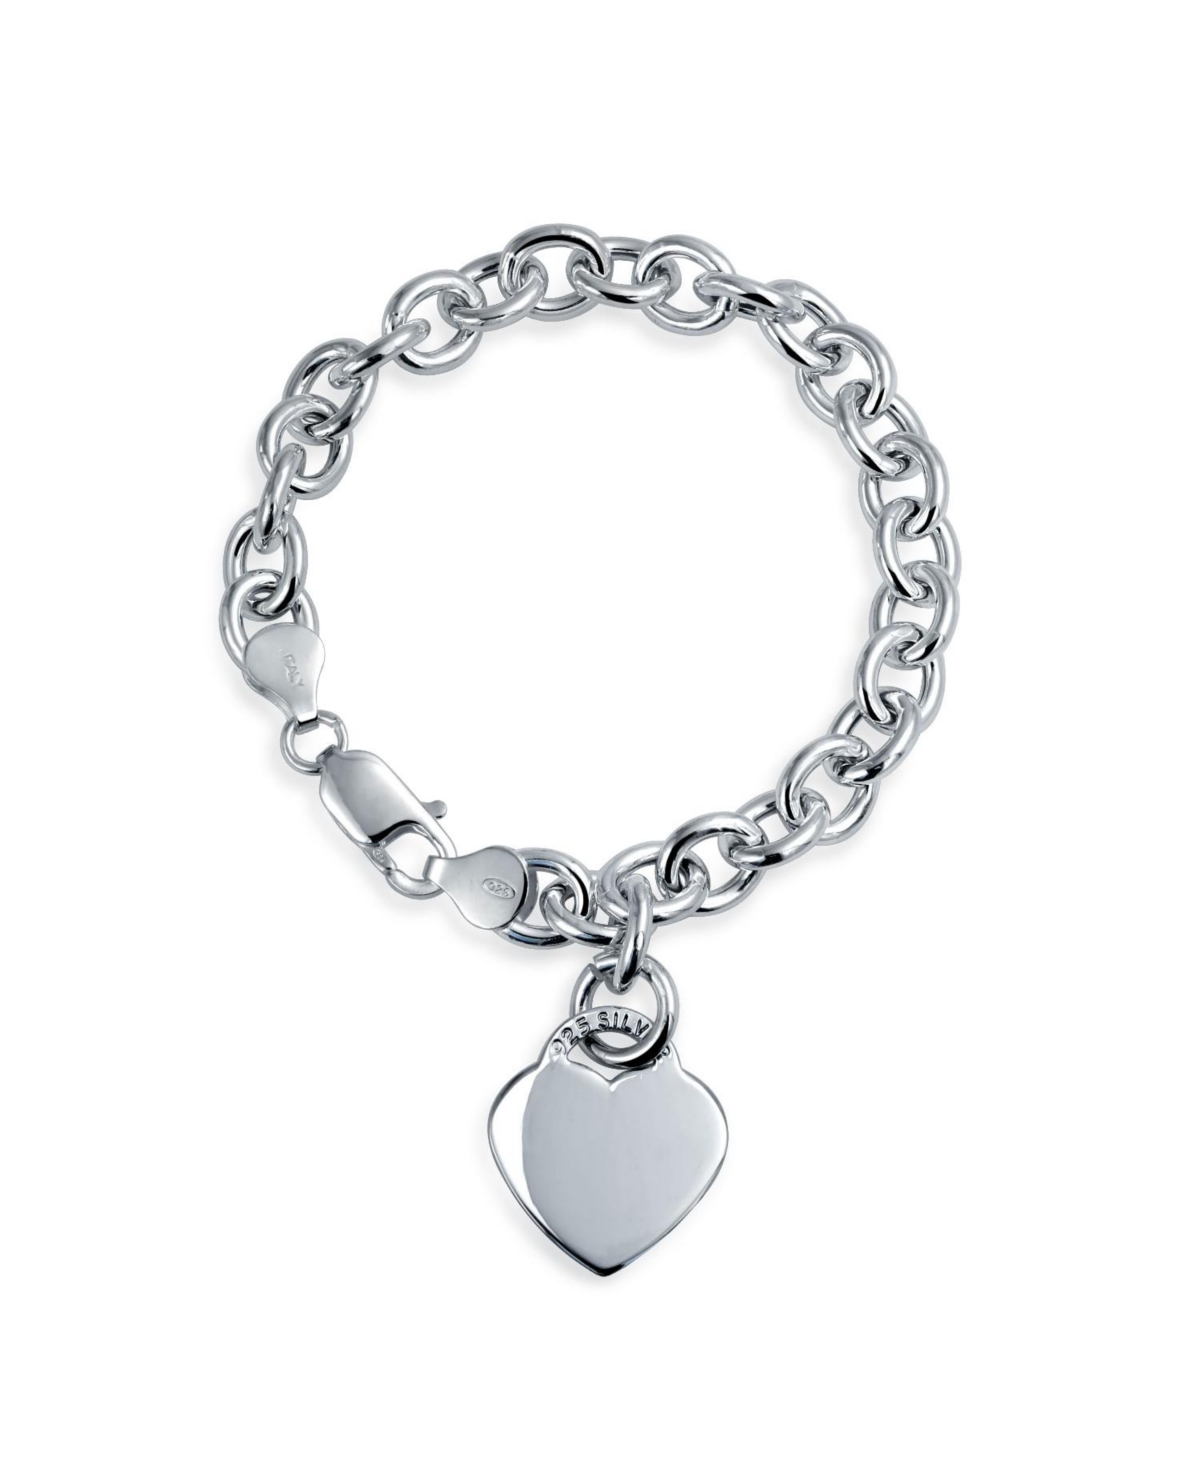 Bling .925 Closet Teens Silver Charm Link Tag For Shape Bracelet Sterling 7.5 Italy - in Made Smart Solid Jewelry Silver Women Inch | Heart